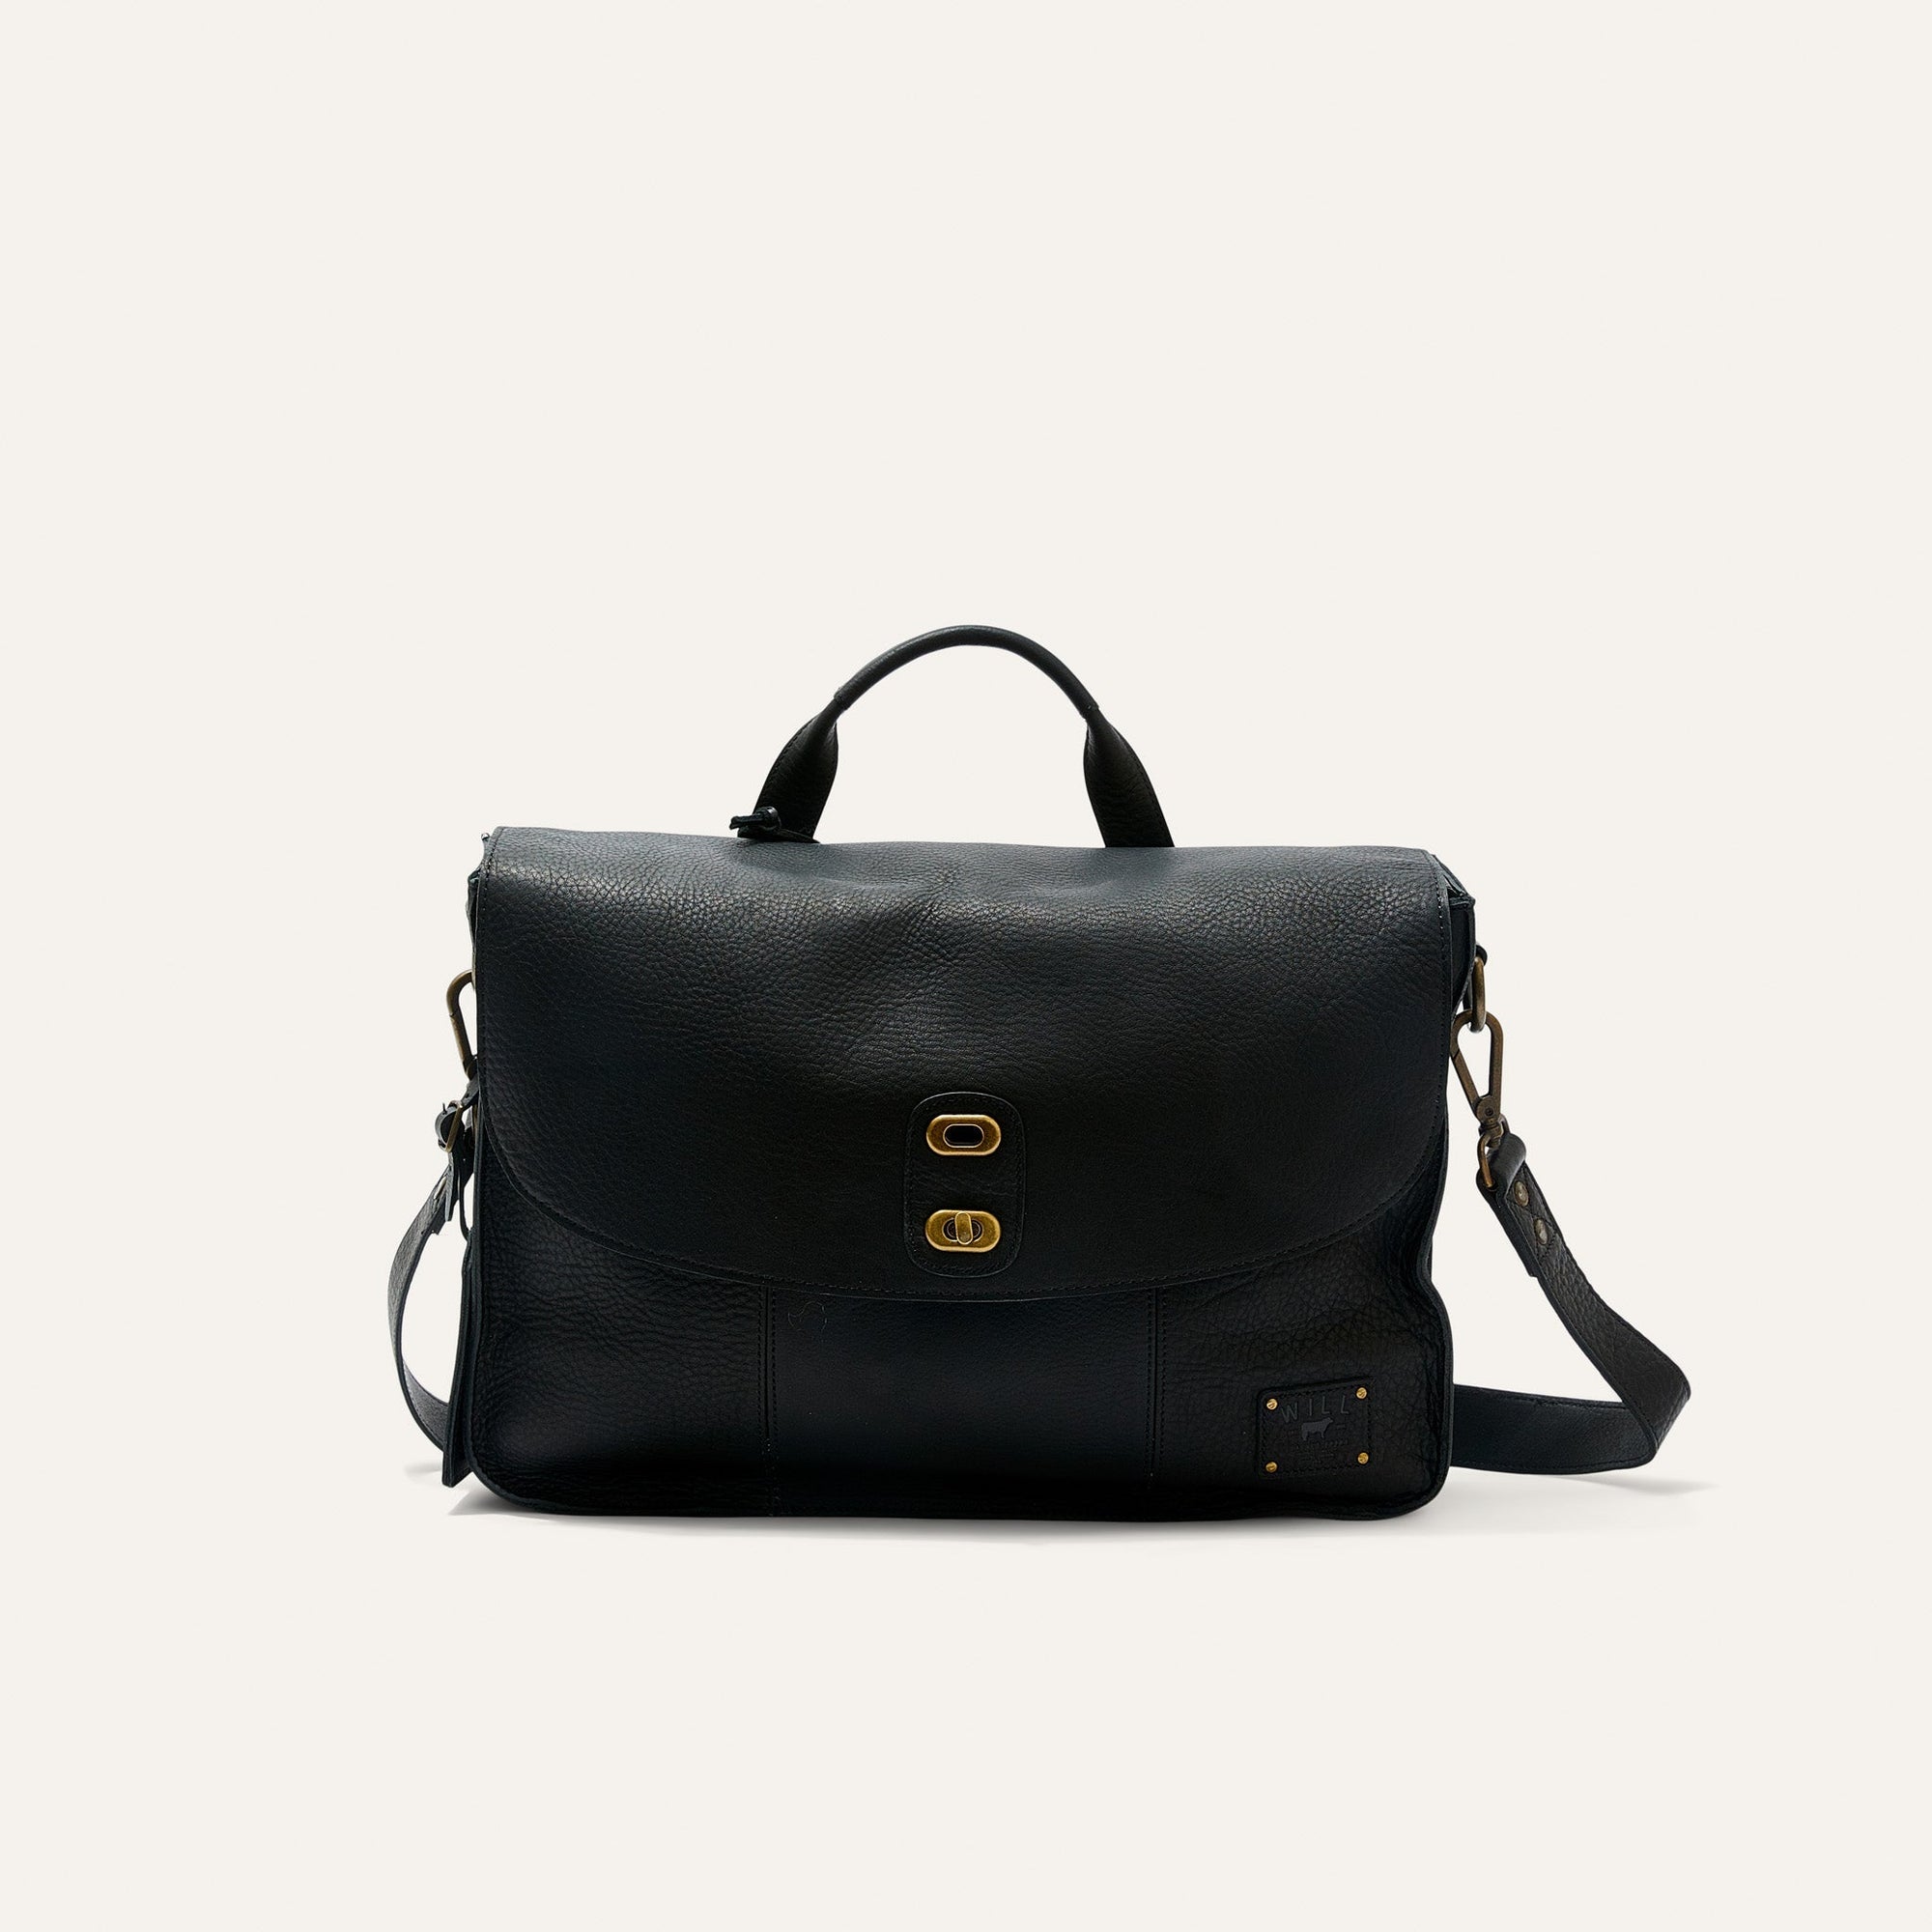 Kent Leather Messenger Bag in Black by Will Leather Goods